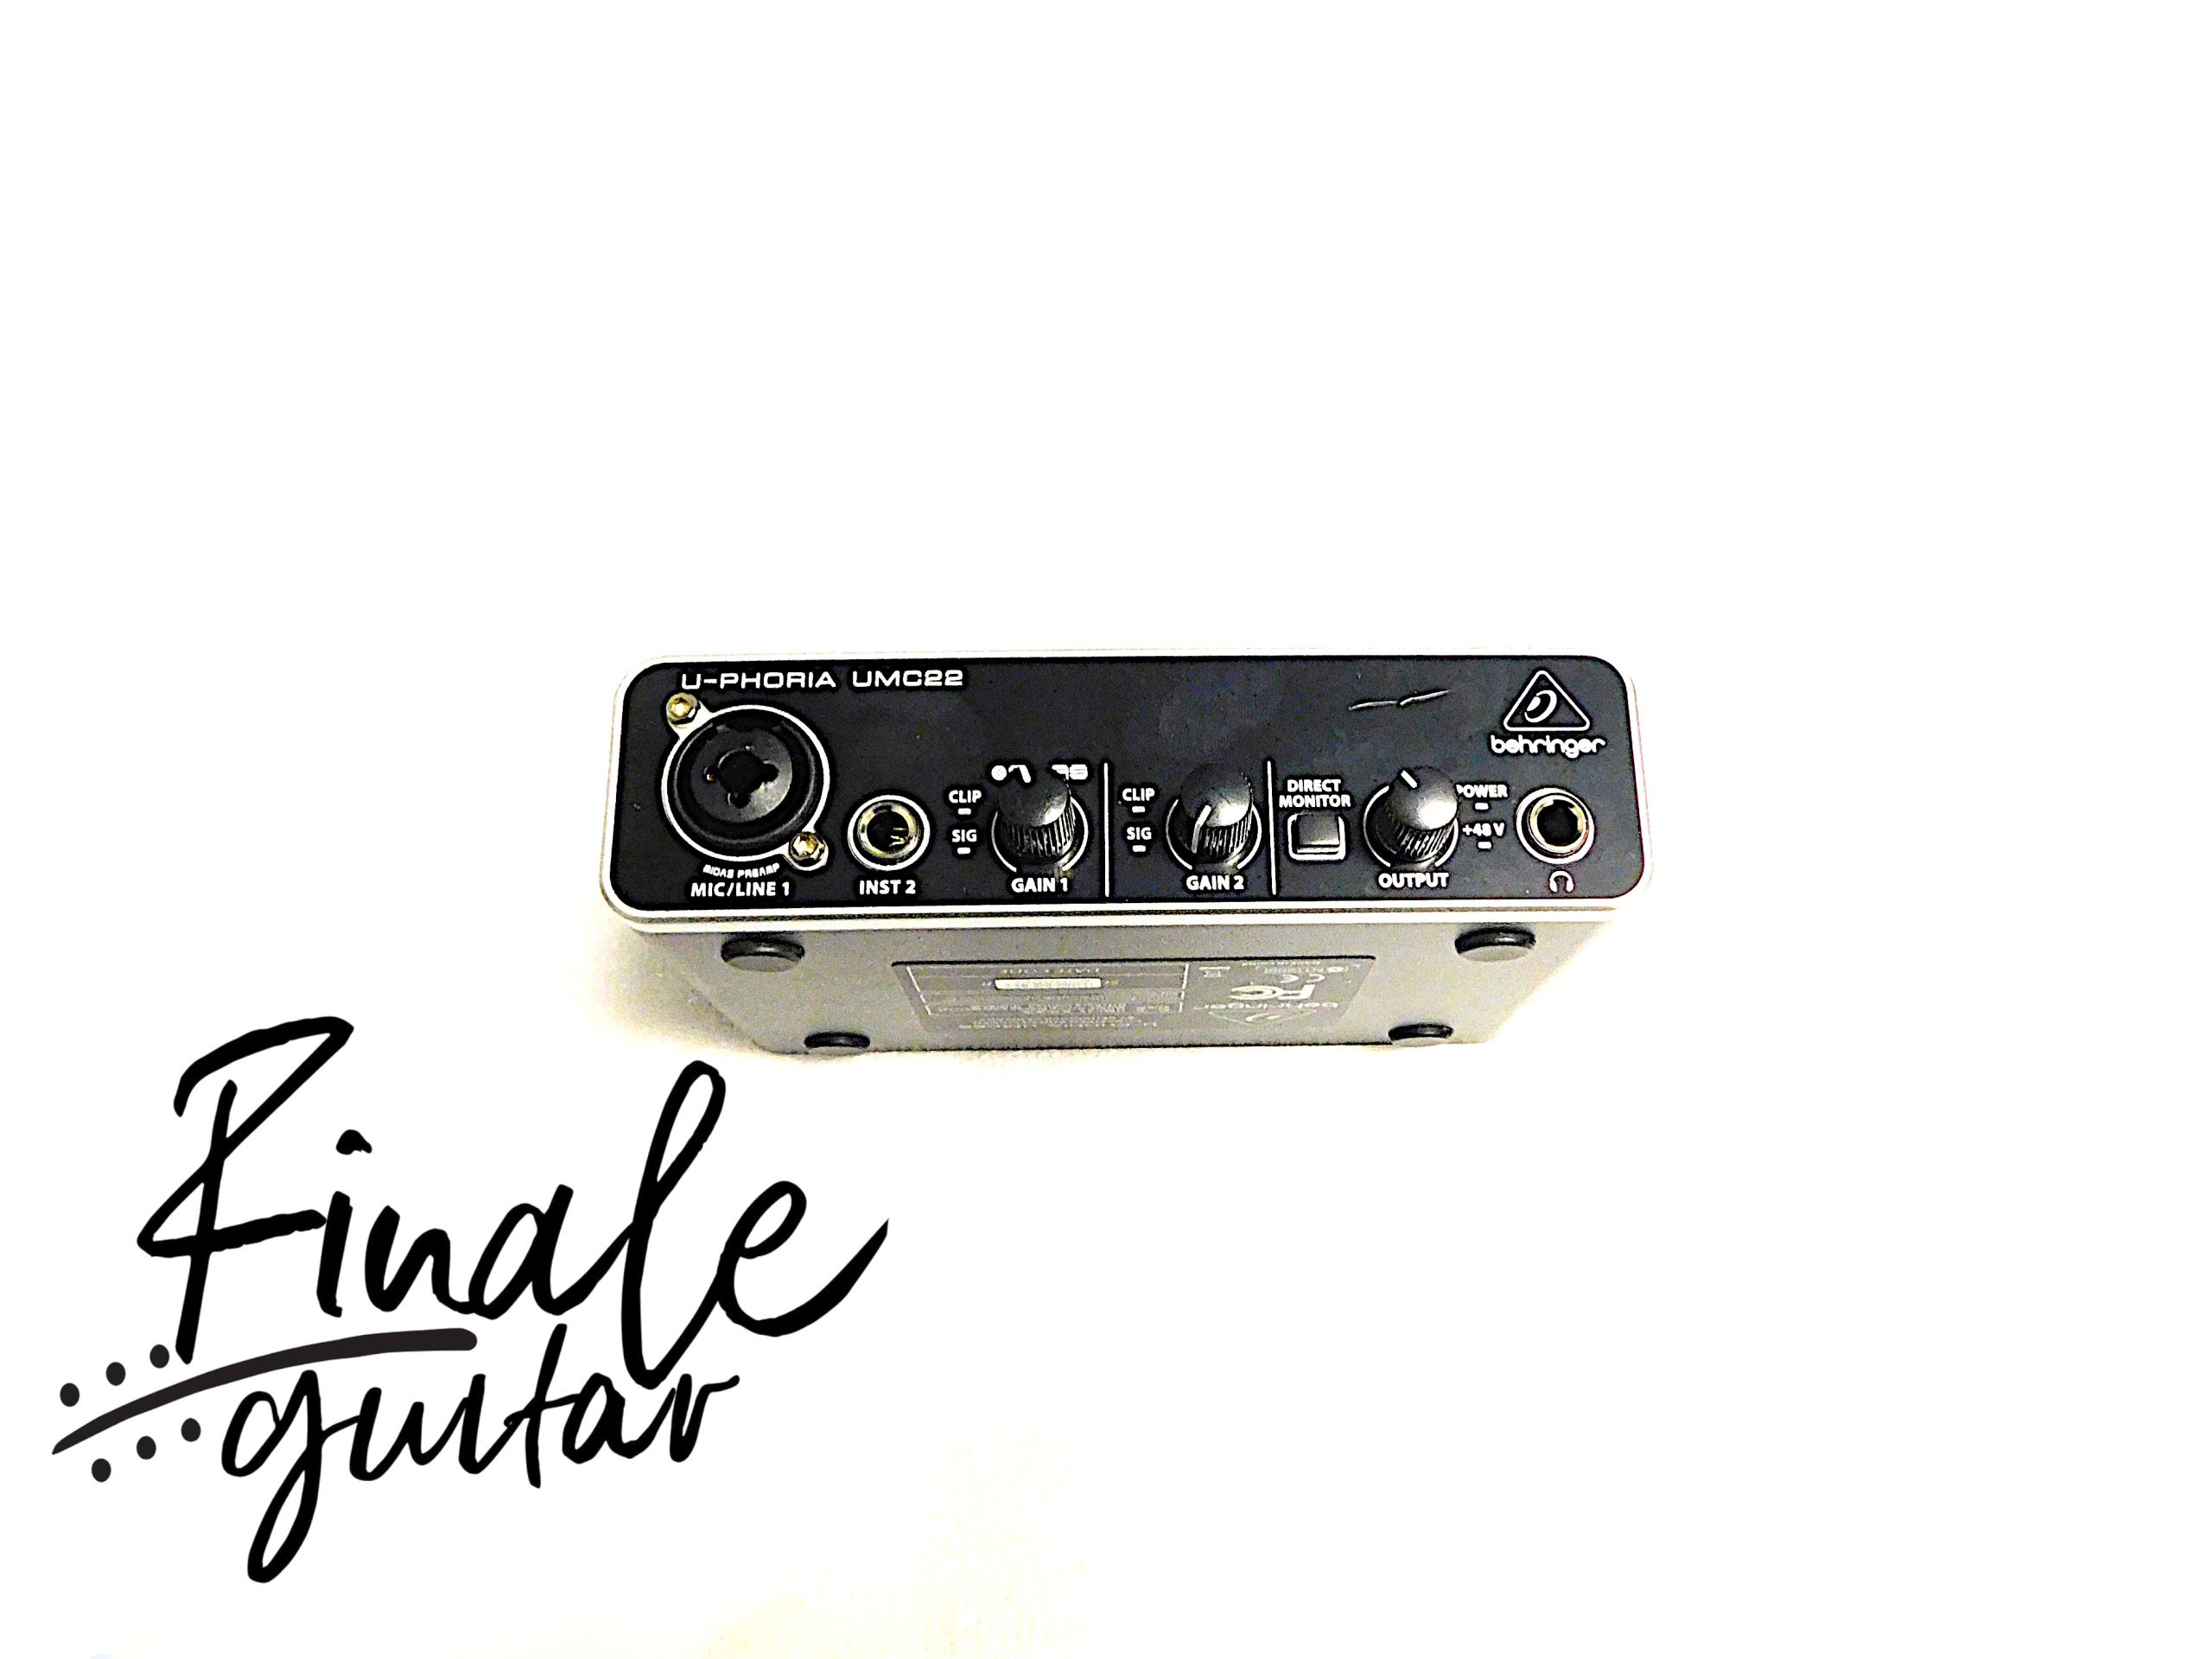 Behringer Uphoria UMC22 Audio Interface for sale in our Sheffield guitar shop, Finale Guitar